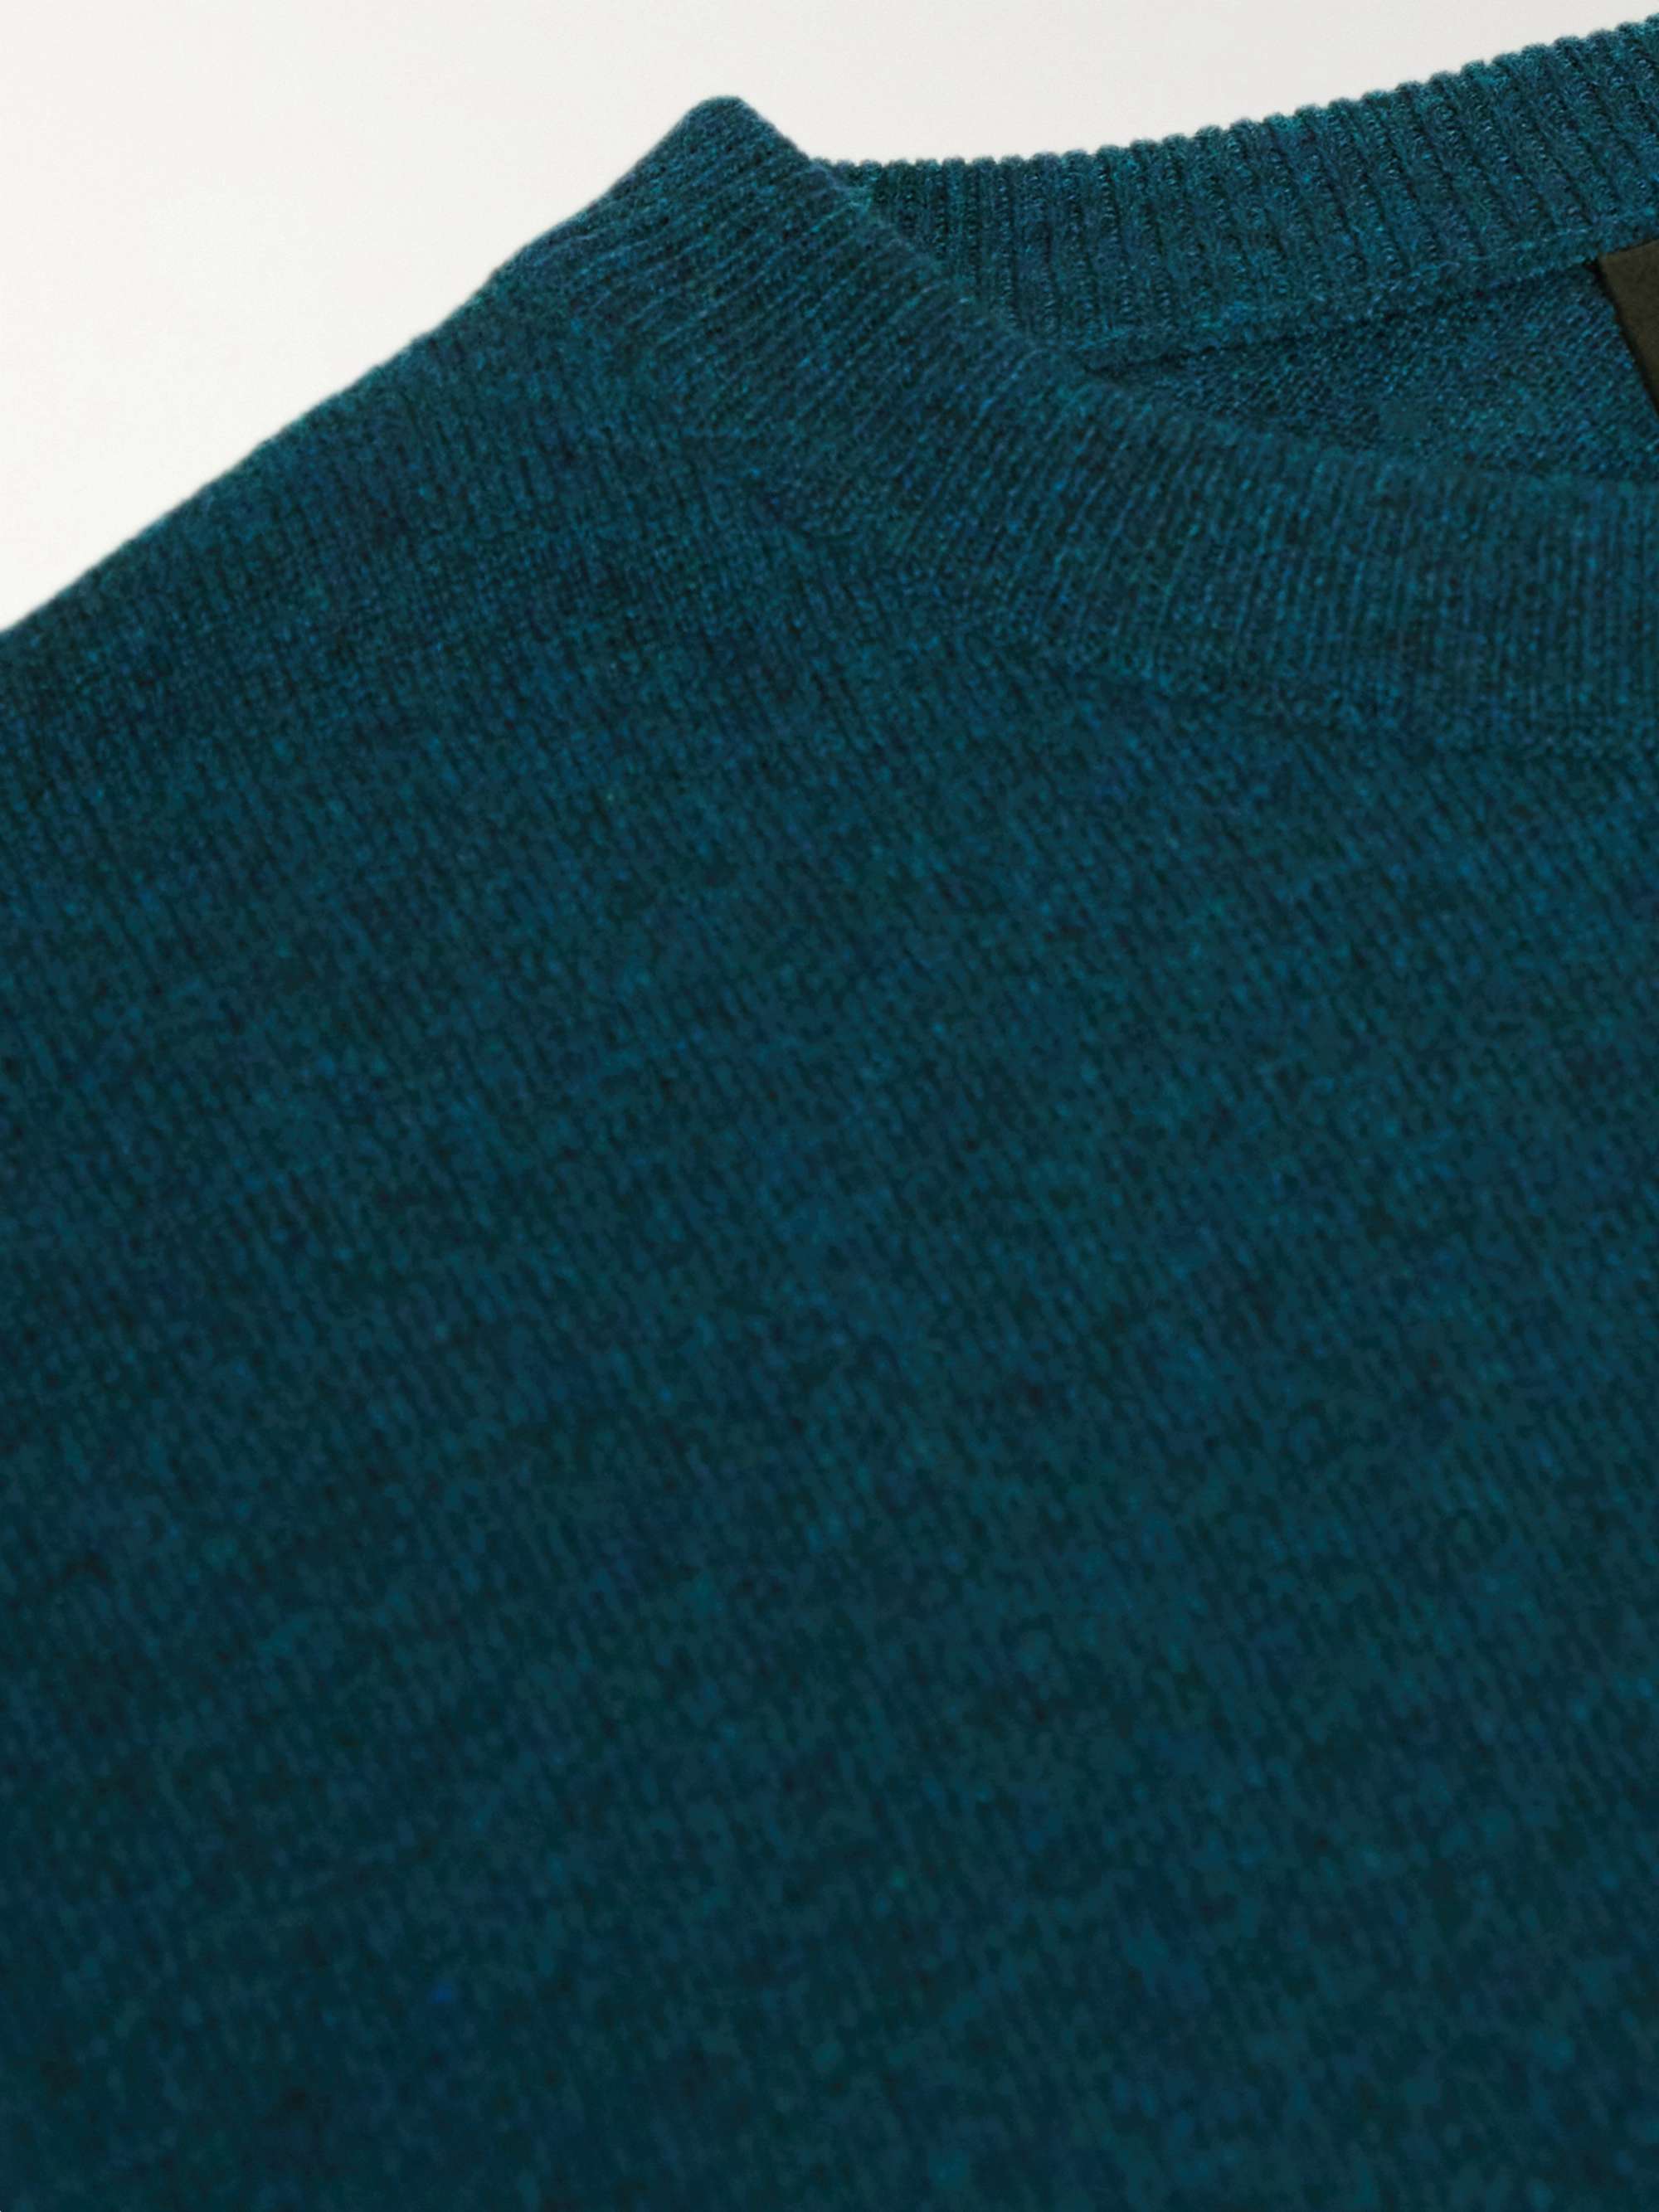 DUNHILL Cashmere Sweater